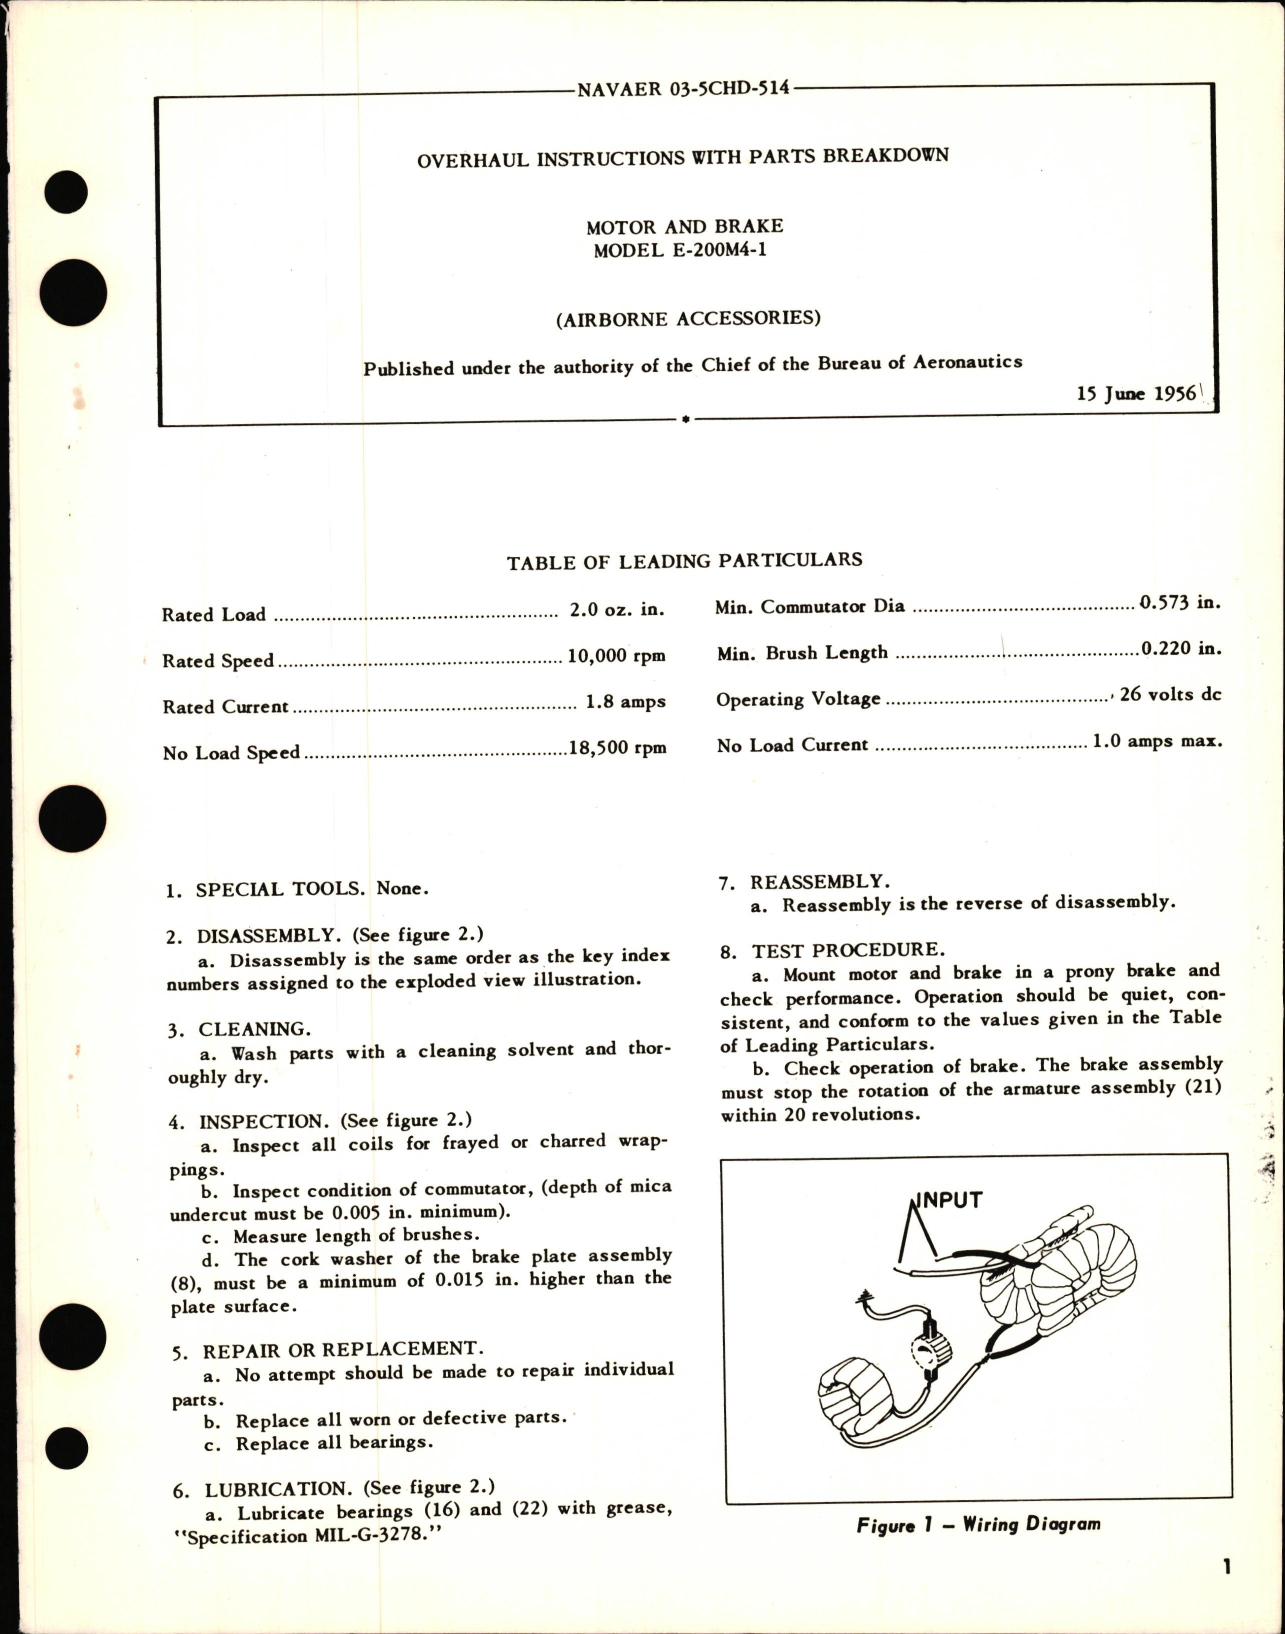 Sample page 1 from AirCorps Library document: Overhaul Instruments with Parts Breakdown for Motor and Brake Model E-200M4-1